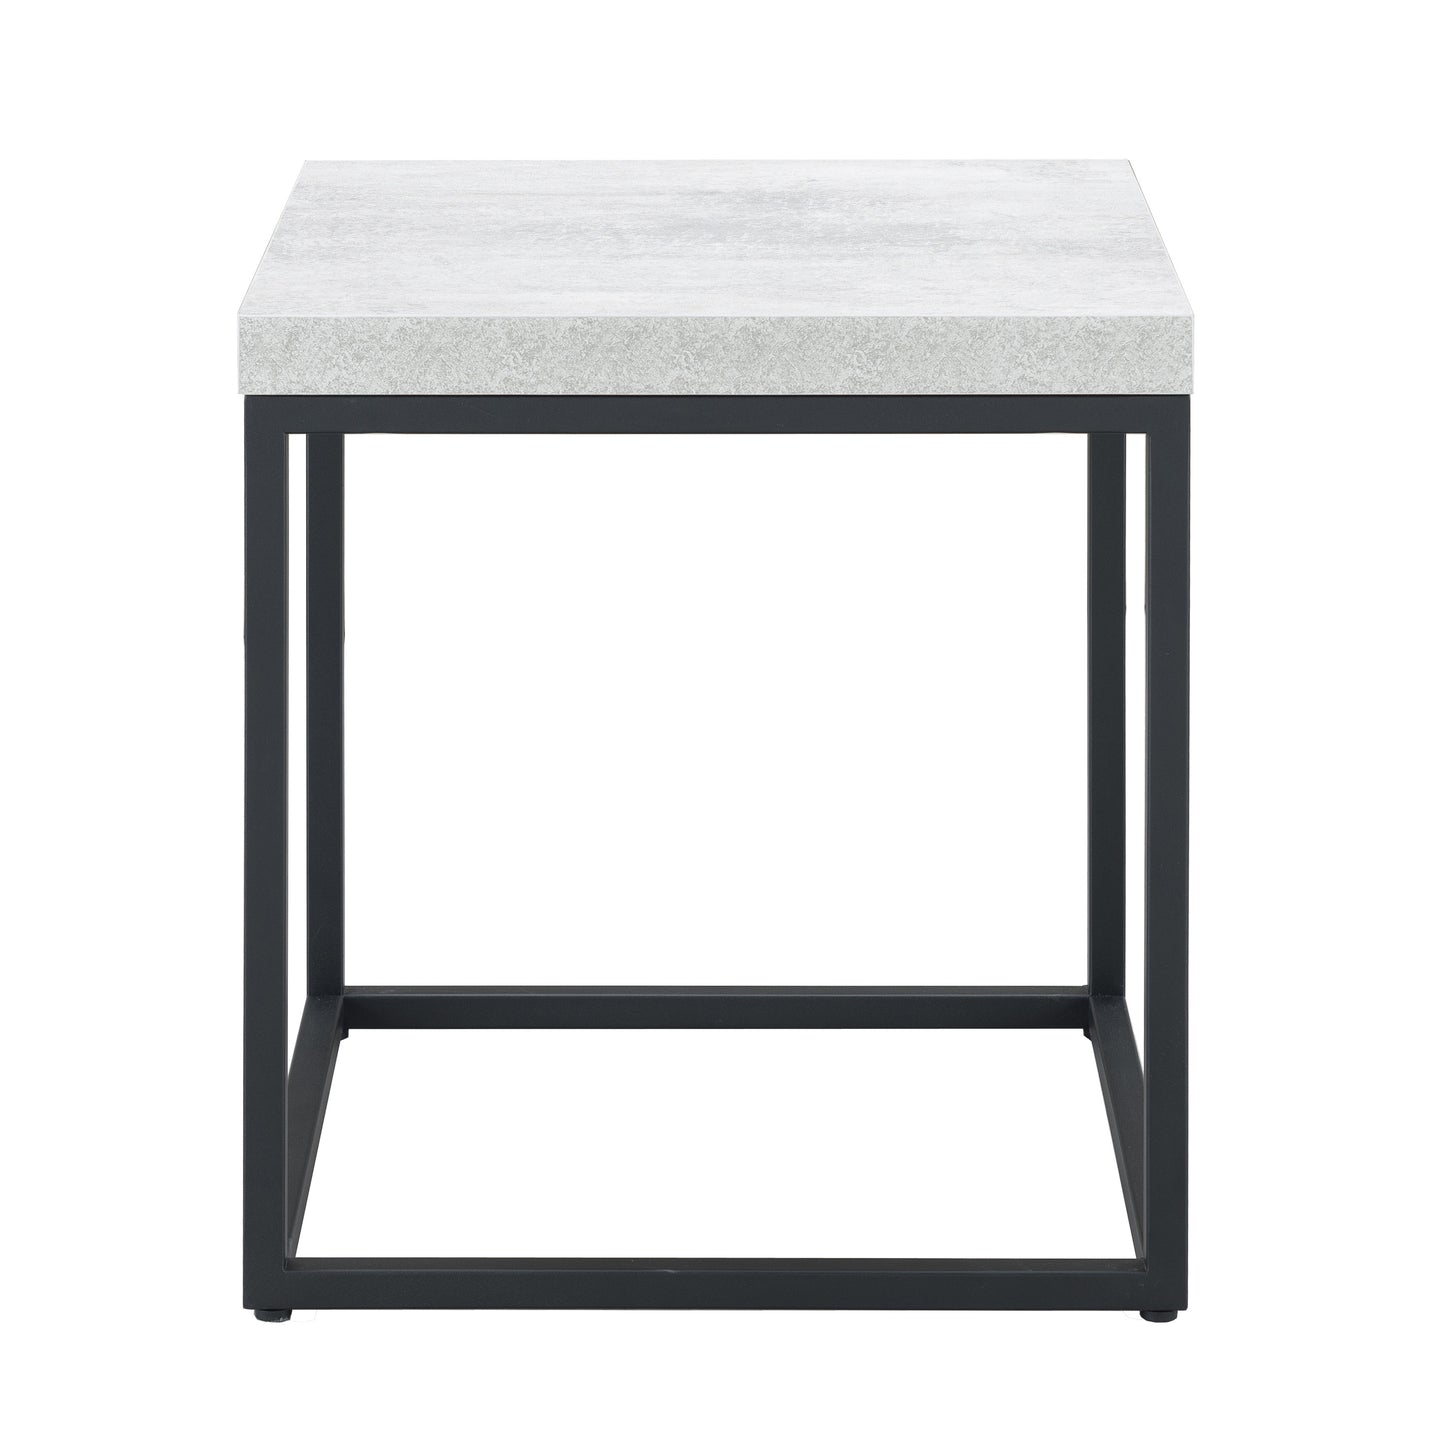 Criterion Chryzler End Table 450mm Metal Frame, Cement Look